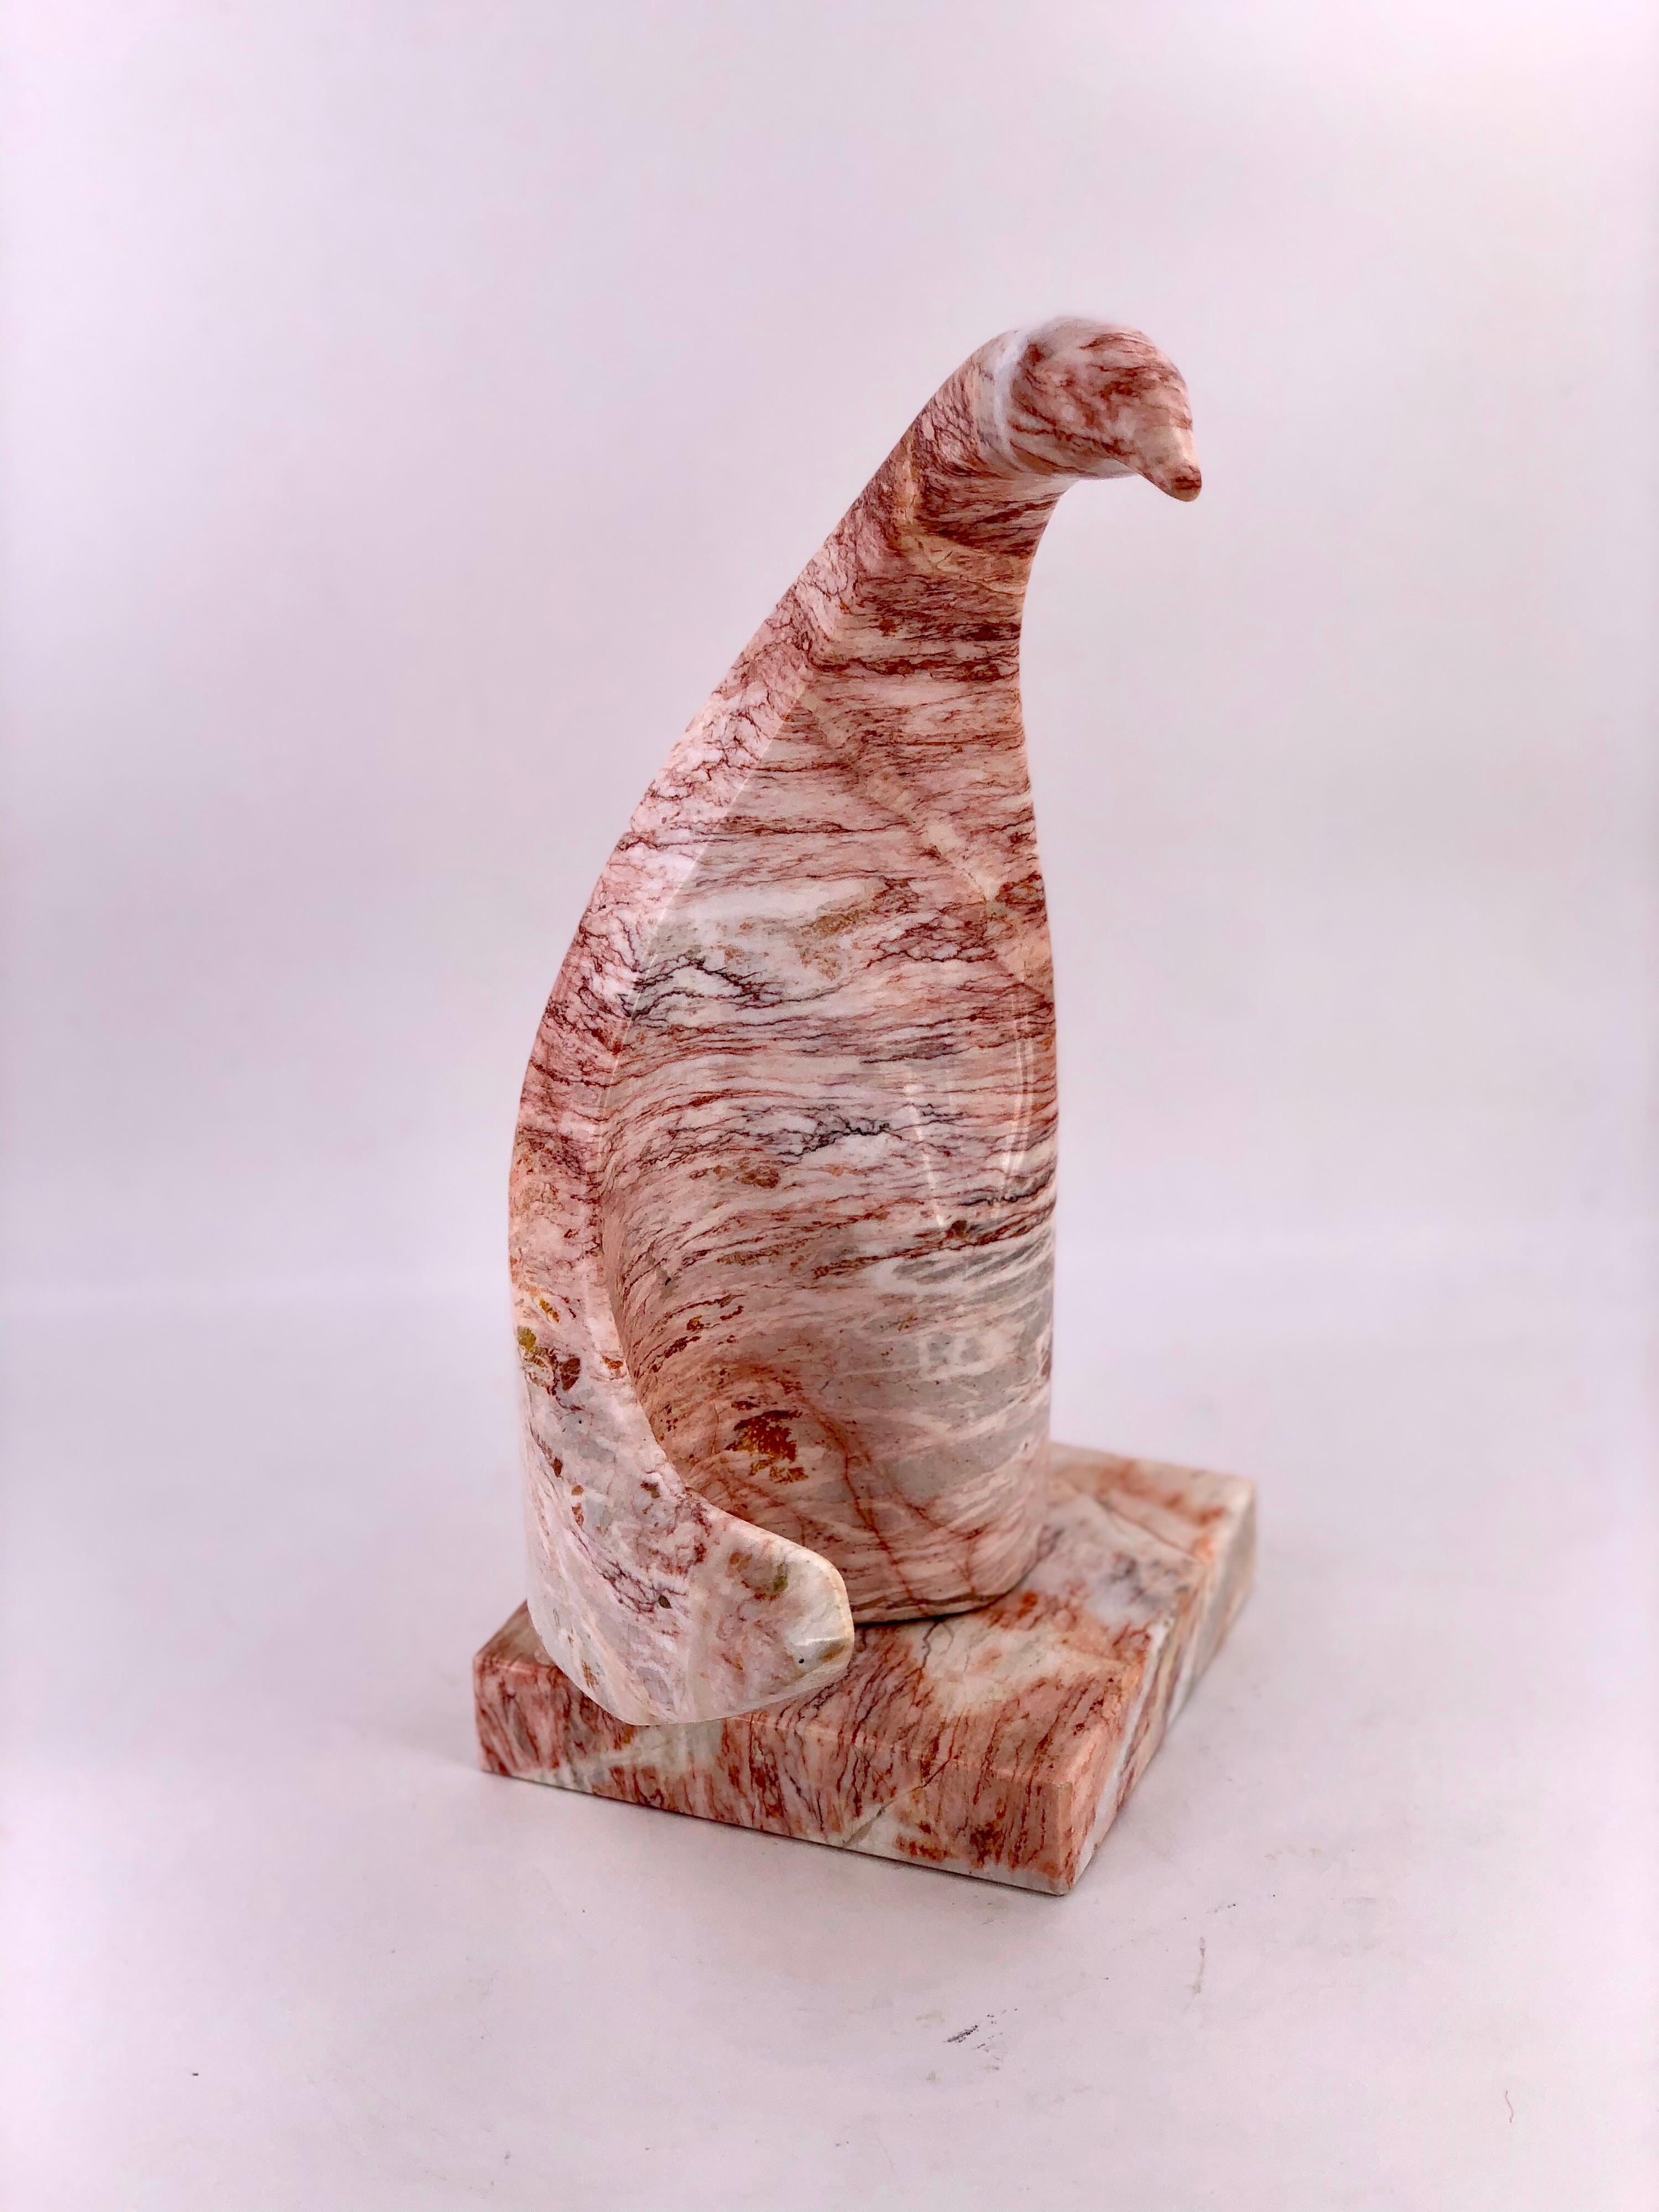 Striking Solid Pink Marble Abstract Bird Sculpture - Gray Figurative Sculpture by Unknown